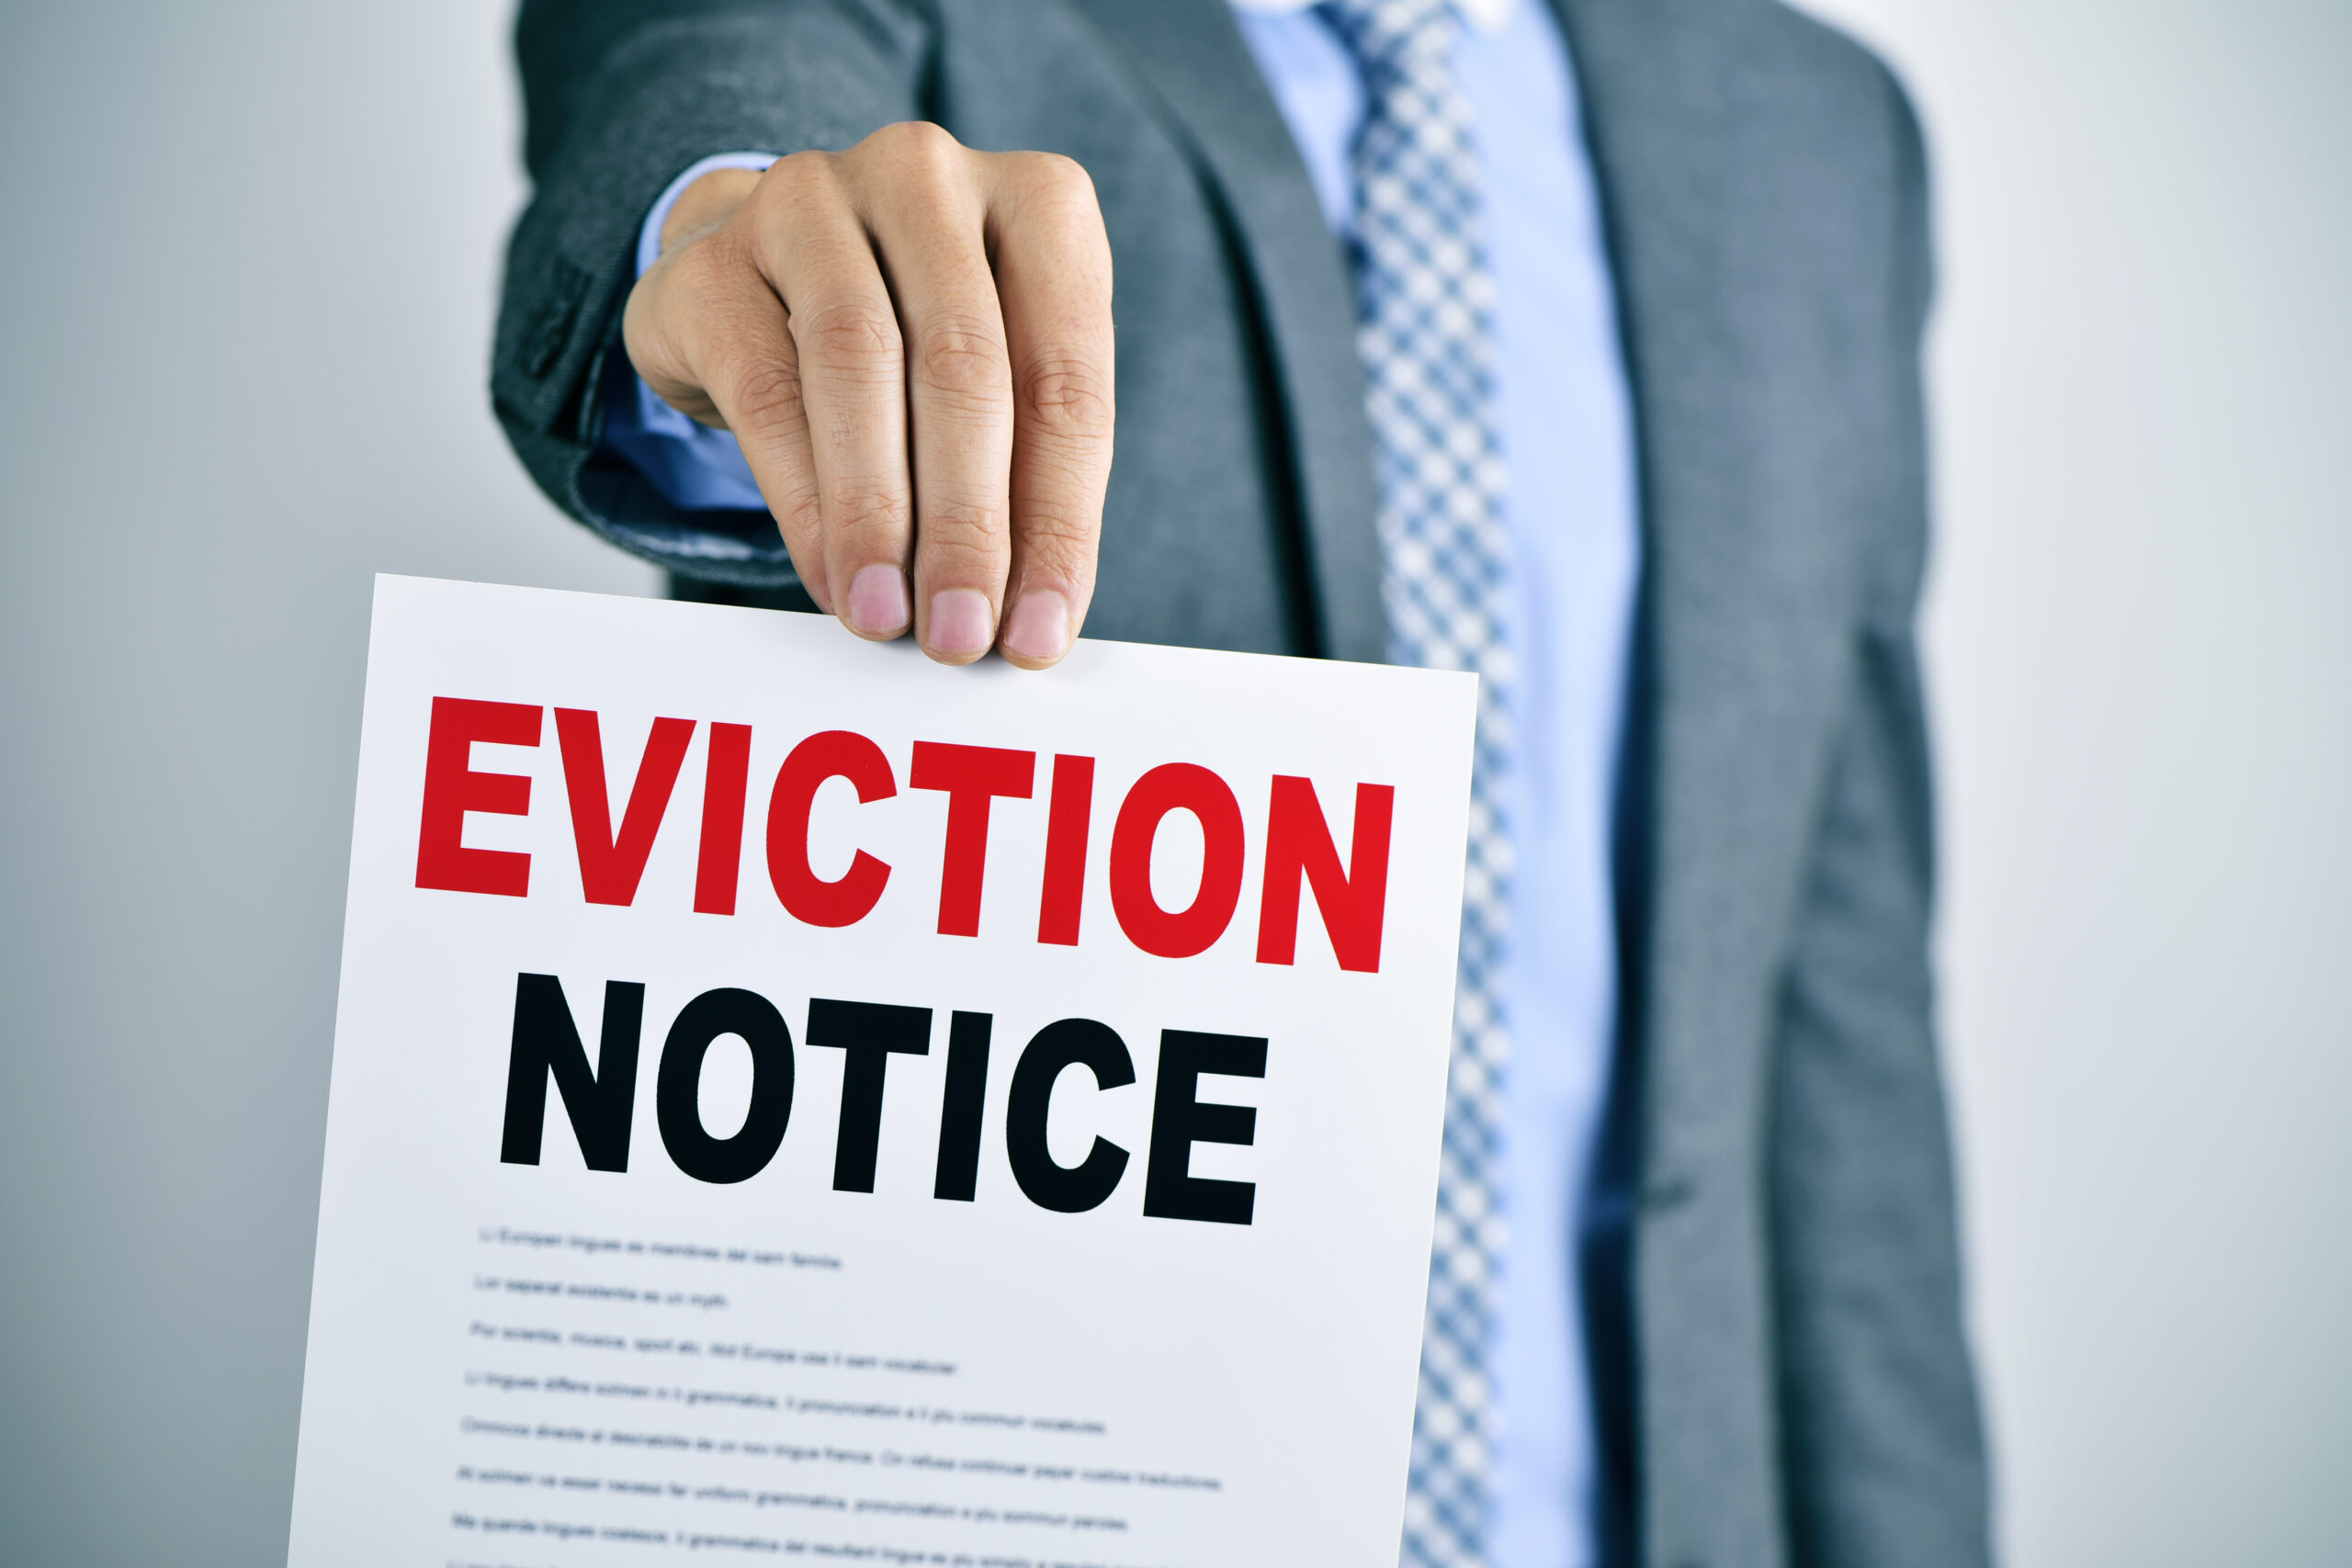 NTX Eviction expert shows an eviction notice